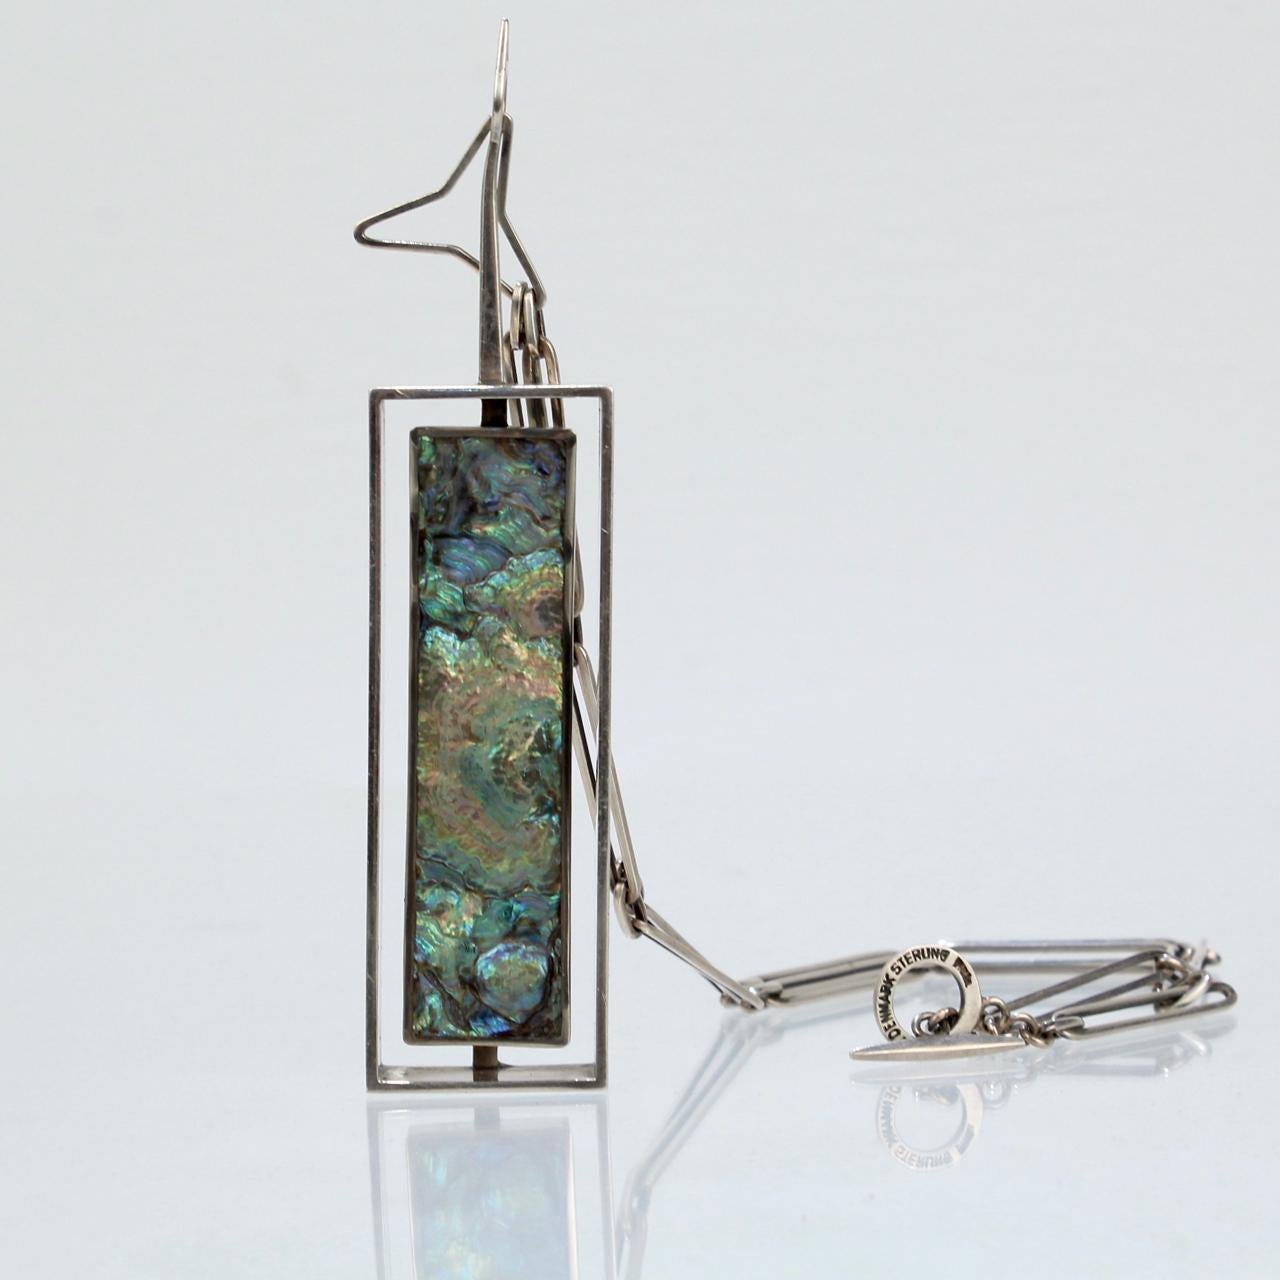 Women's Danish Modern Sterling Silver & Abalone Shell Pendant Necklace by Palle Bisgaard